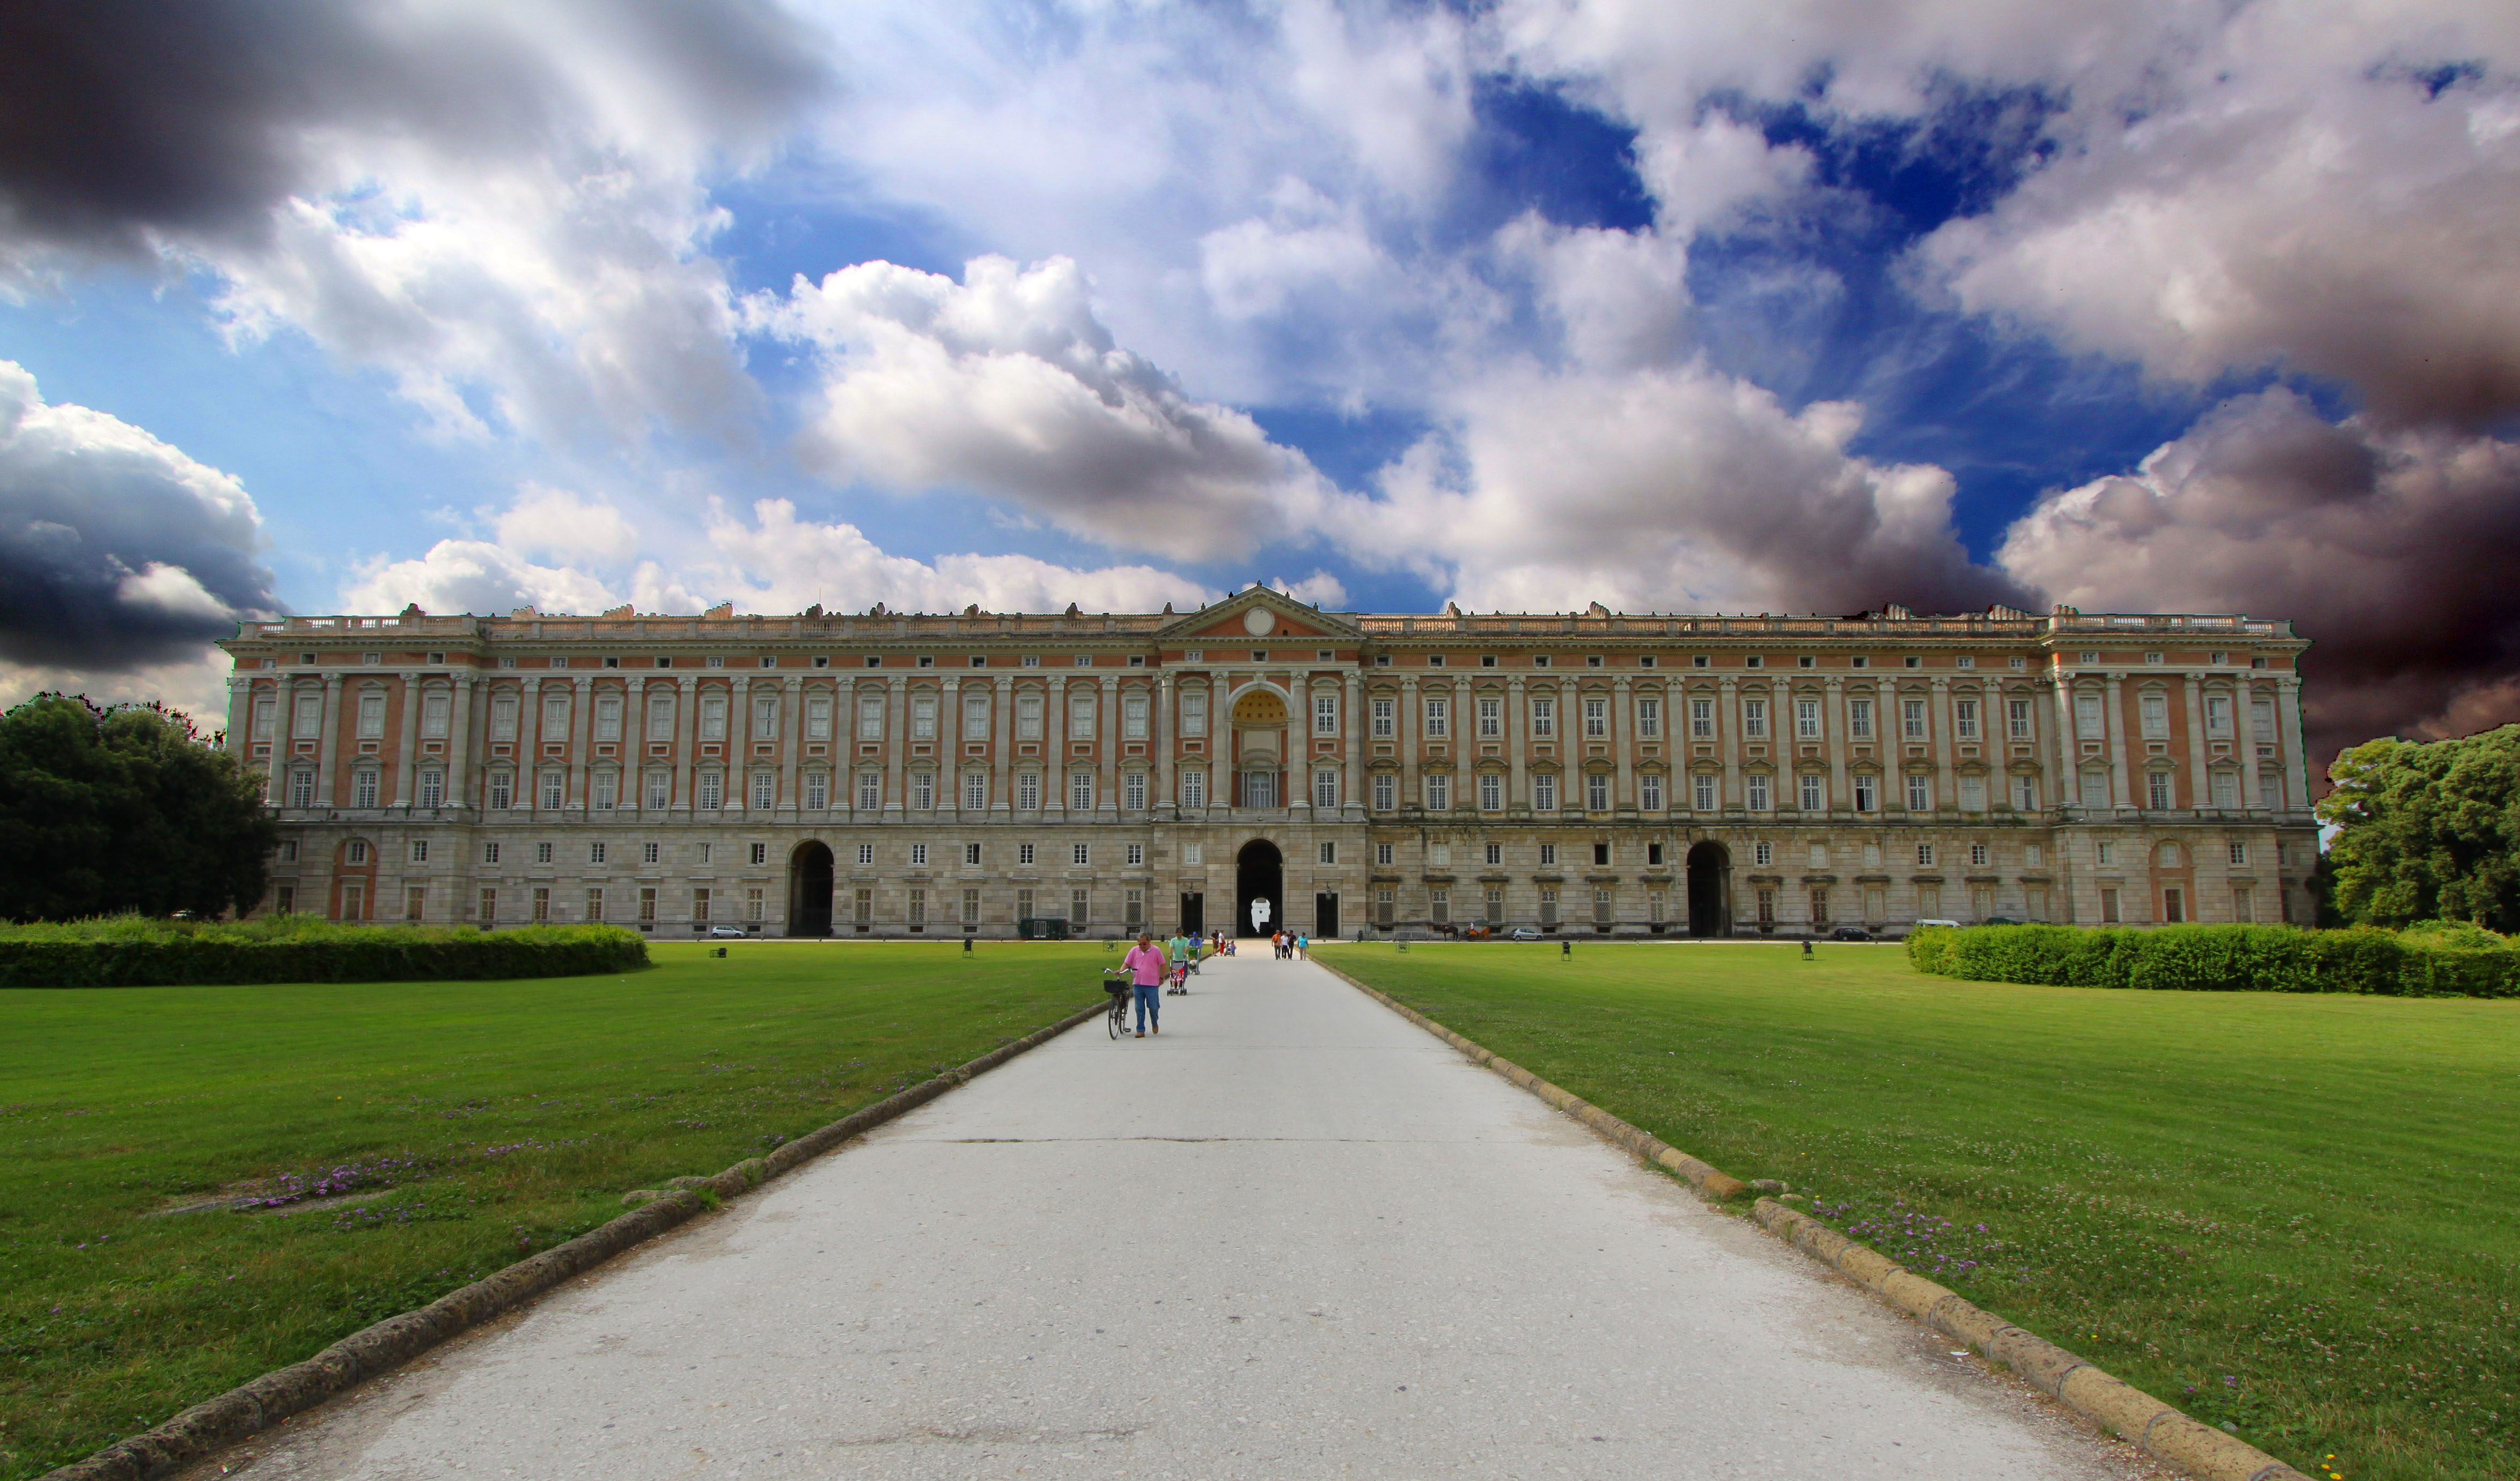 What to know about the Royal Palace of Caserta